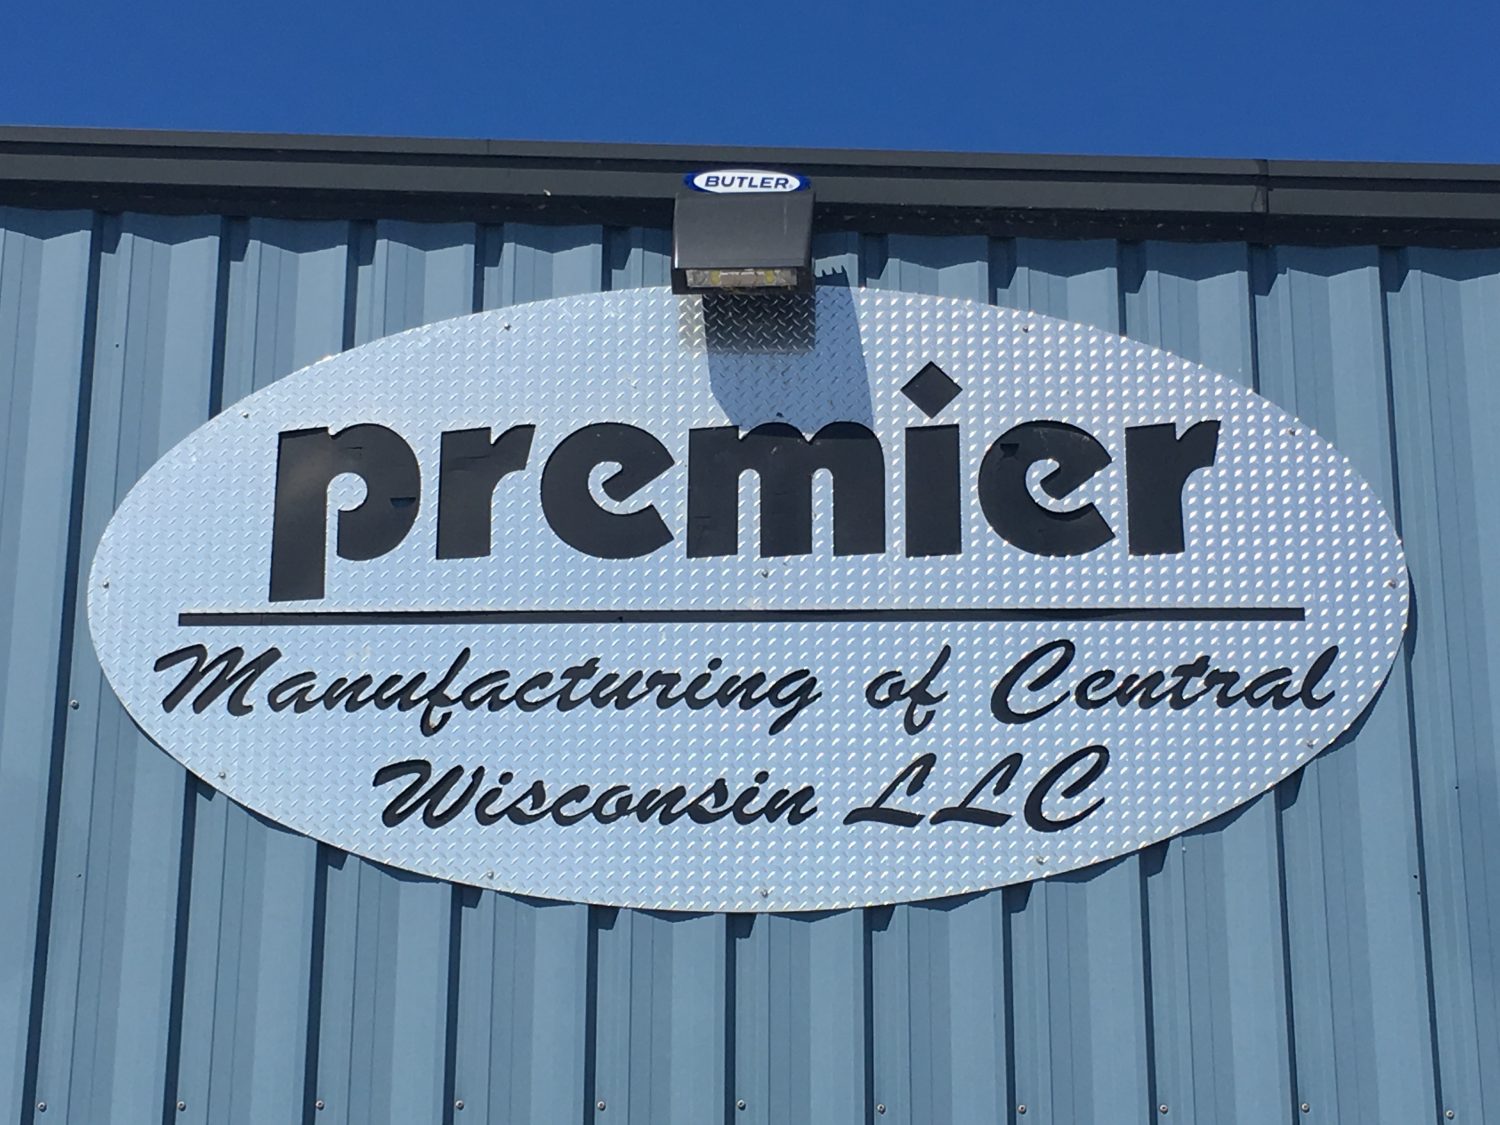 West side manufacturer expansion in full swing